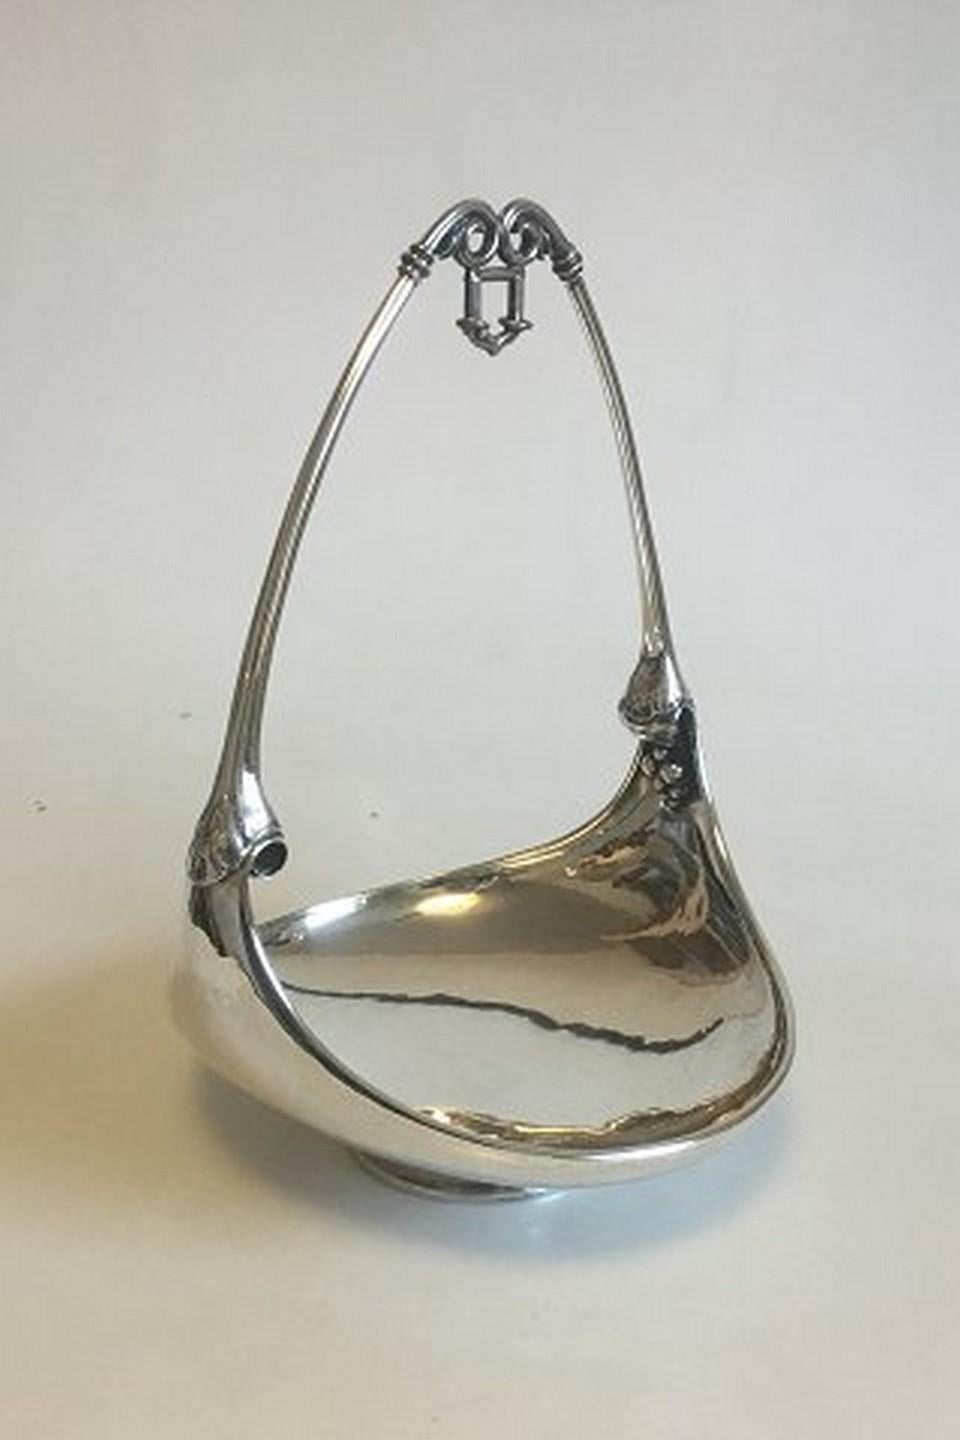 Georg Jensen sterling silver bowl for hanging grapes No 542. From 1925-1933. Measures 34 cm / 13 25/64 in. Weighs 1103 g / 38.90 oz.
Item no.: 386556.